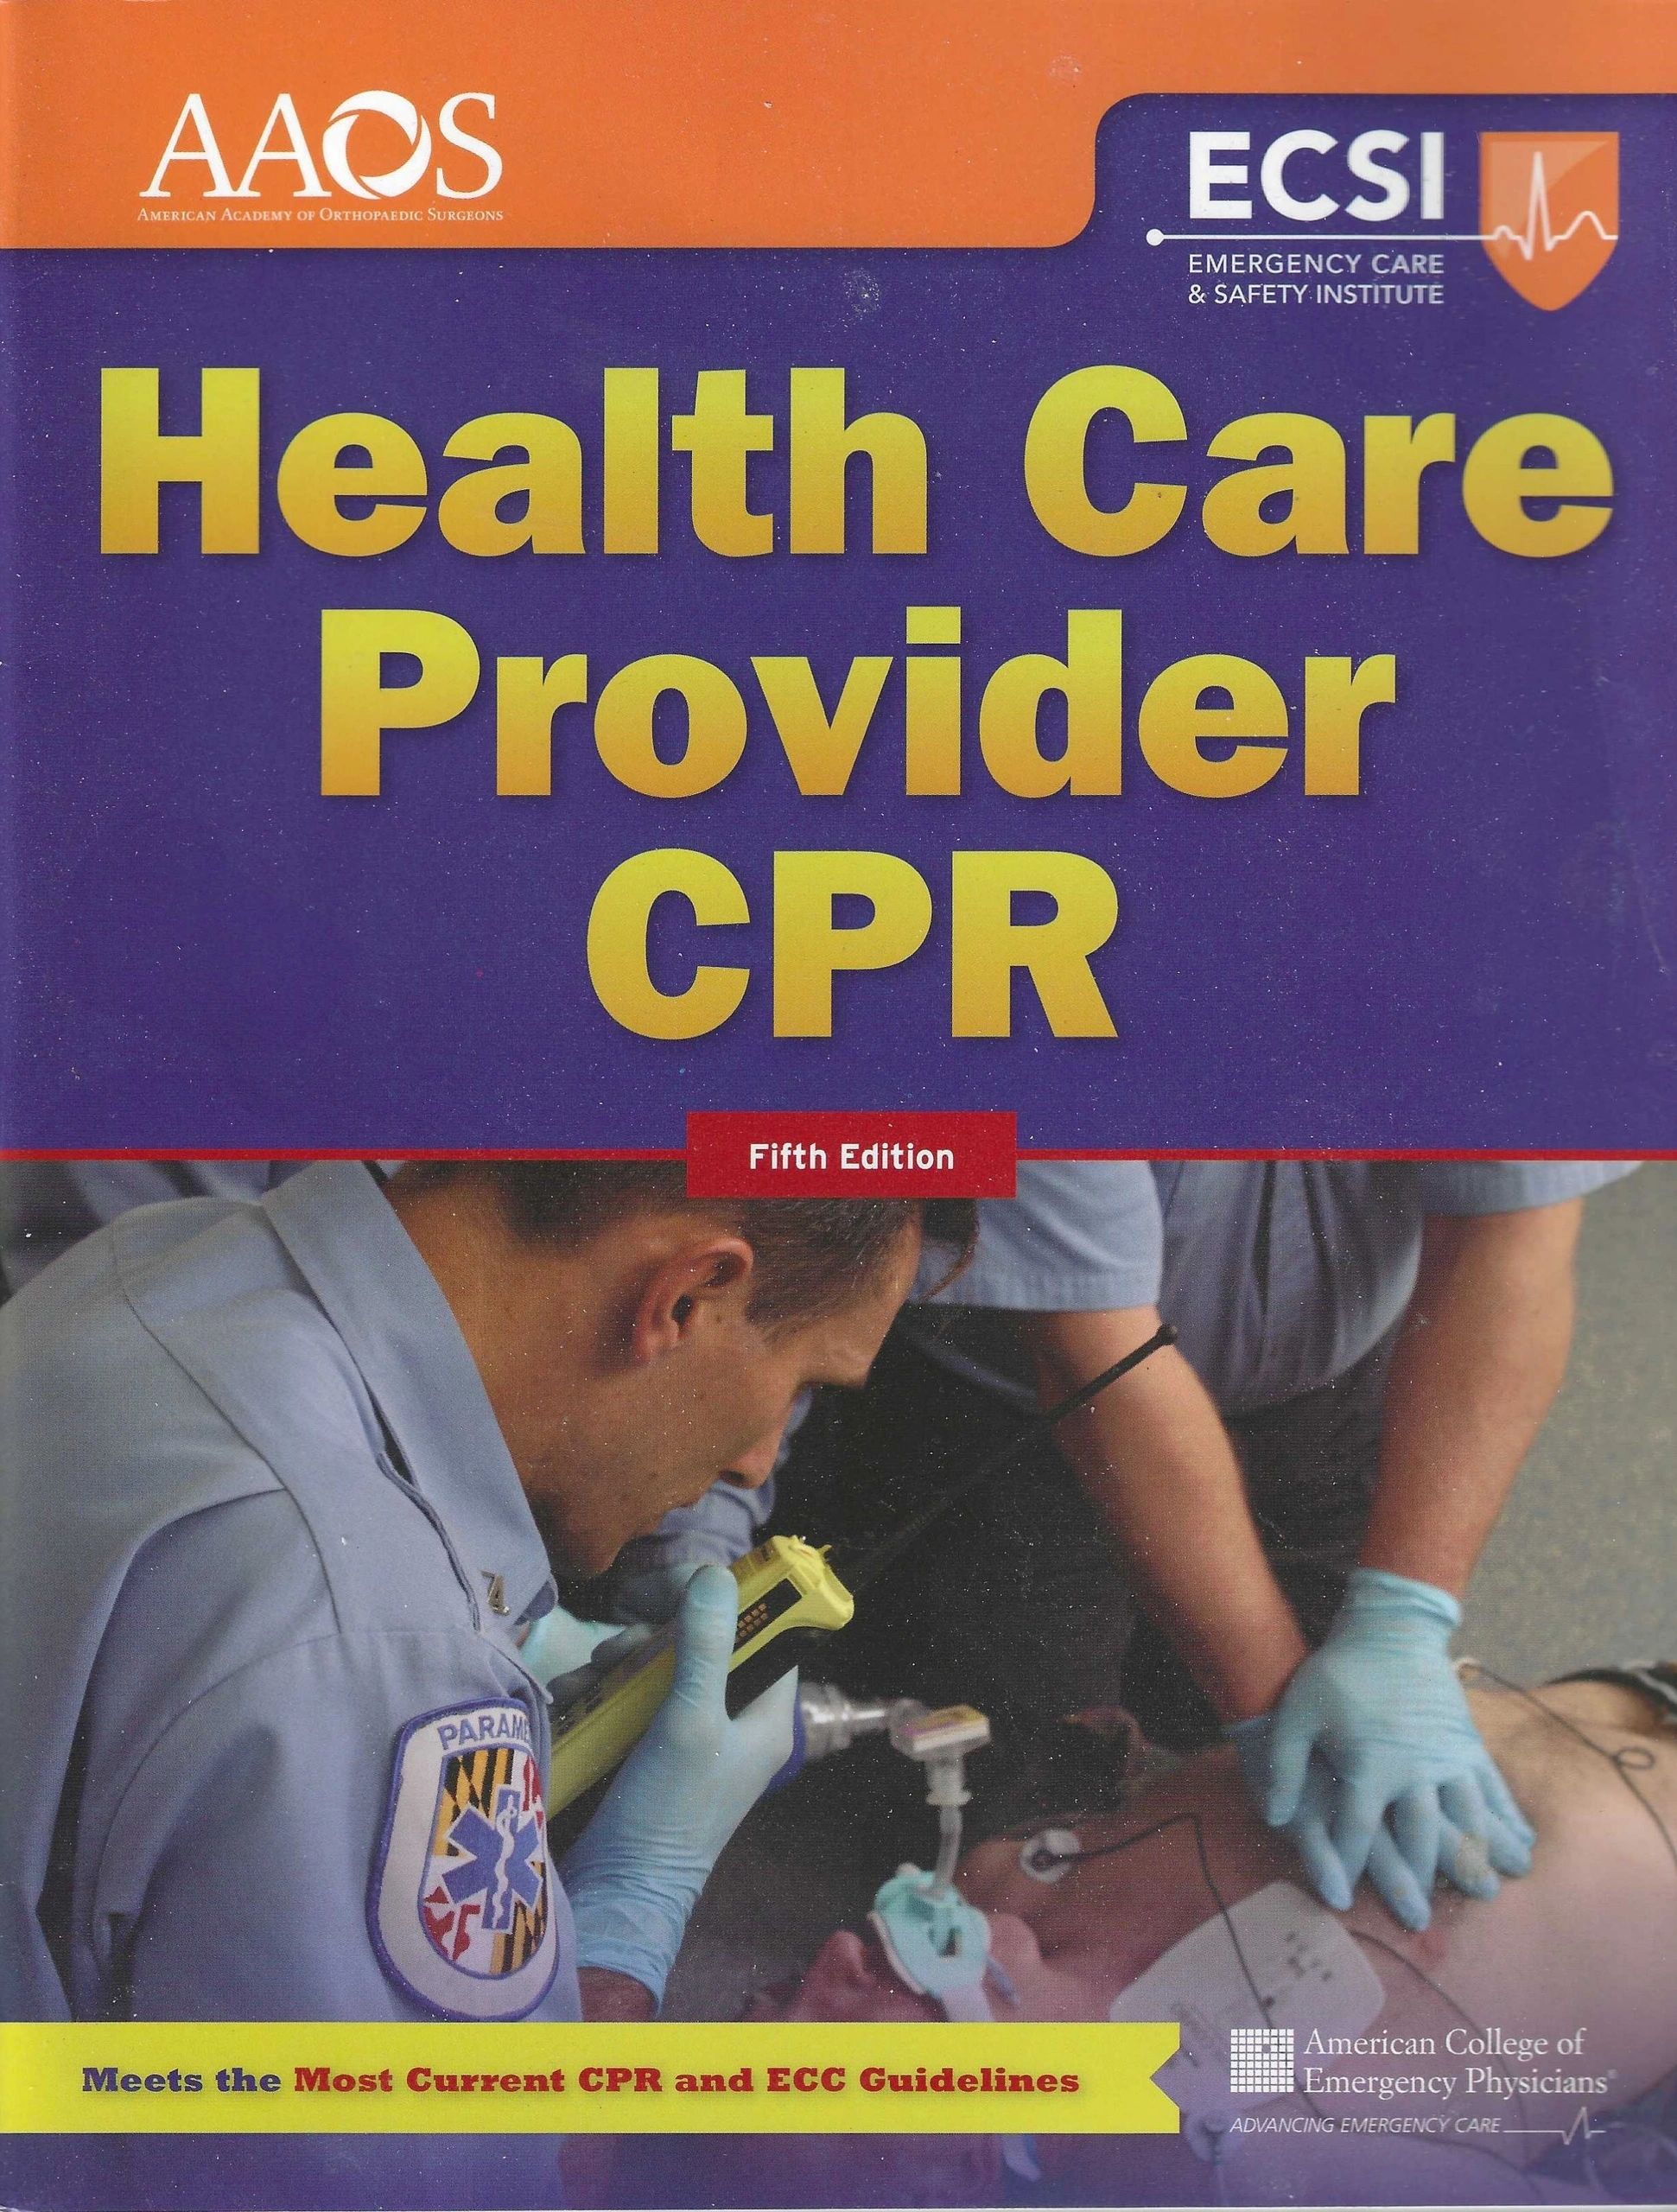 CPR_Healthcare_Cover.jpg